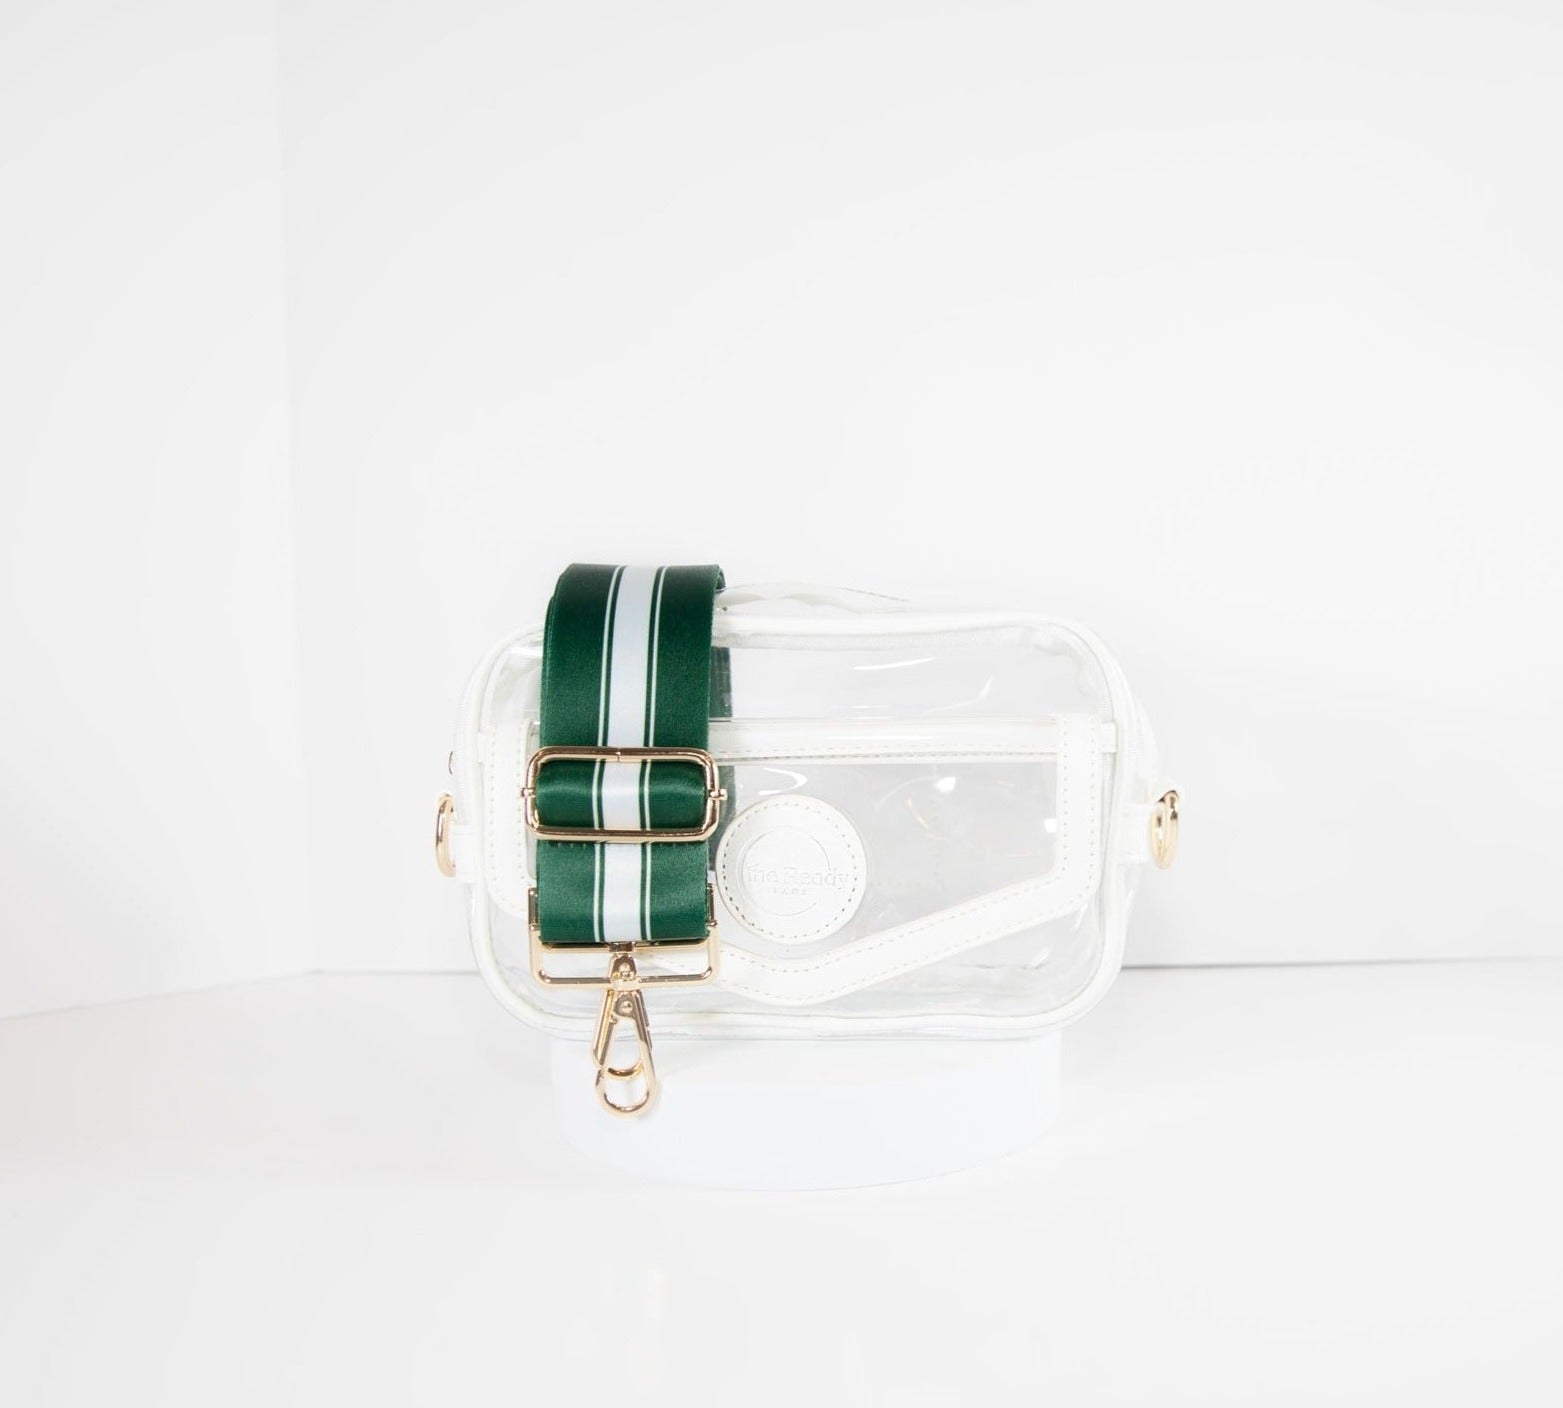 Clear Stadium Bag in white leather trim, front facing, with a crossbody strap in New York Jets team colors.